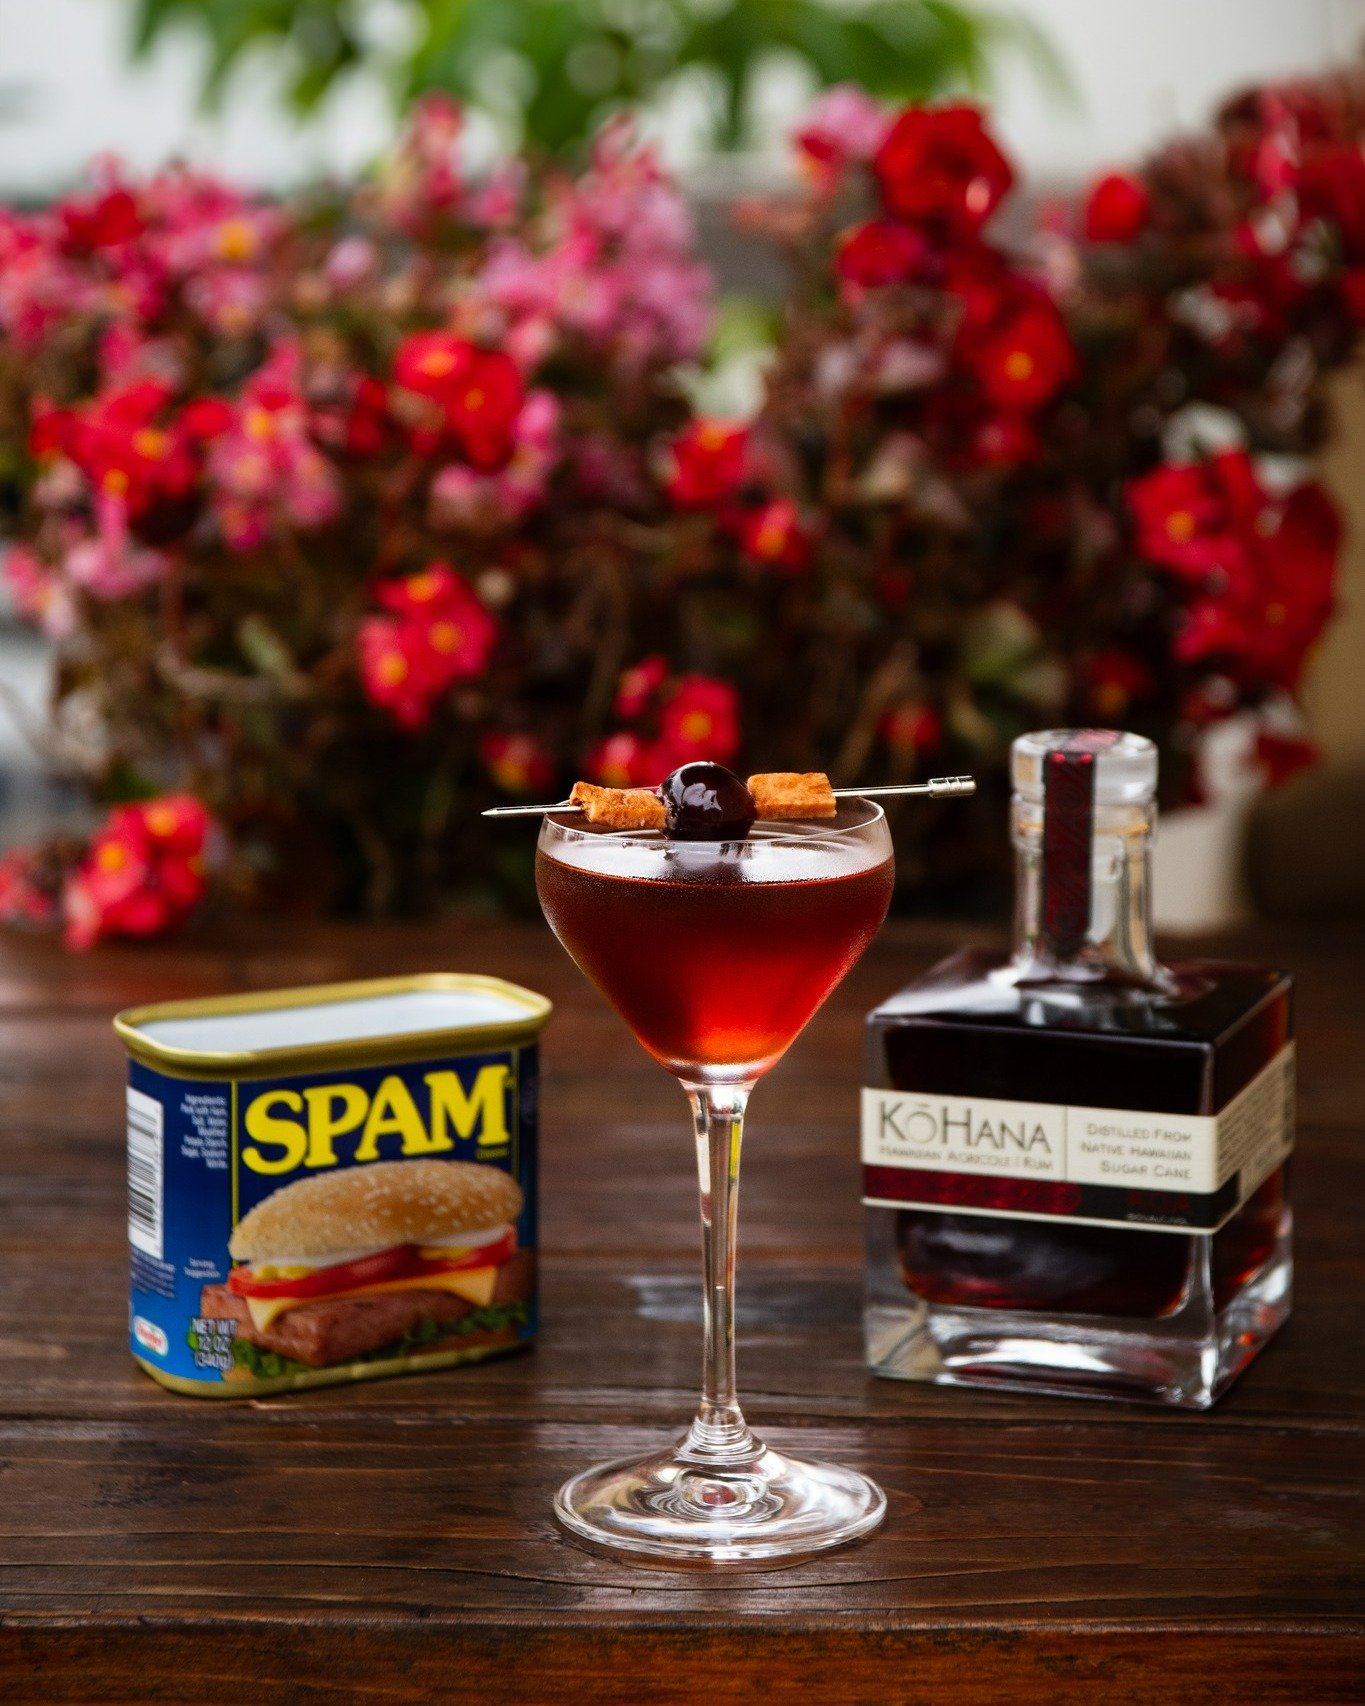 Worked up a thirst yesterday hunting for @waikikispamjam's Golden Ticket yesterday? Well, treat your tastebuds to a hula and shake things up (literally) with our @spam cocktails! 🍹

First image: Spamhattan 🥃

Ingredients:
- 2 oz Kō Hana KOA infused